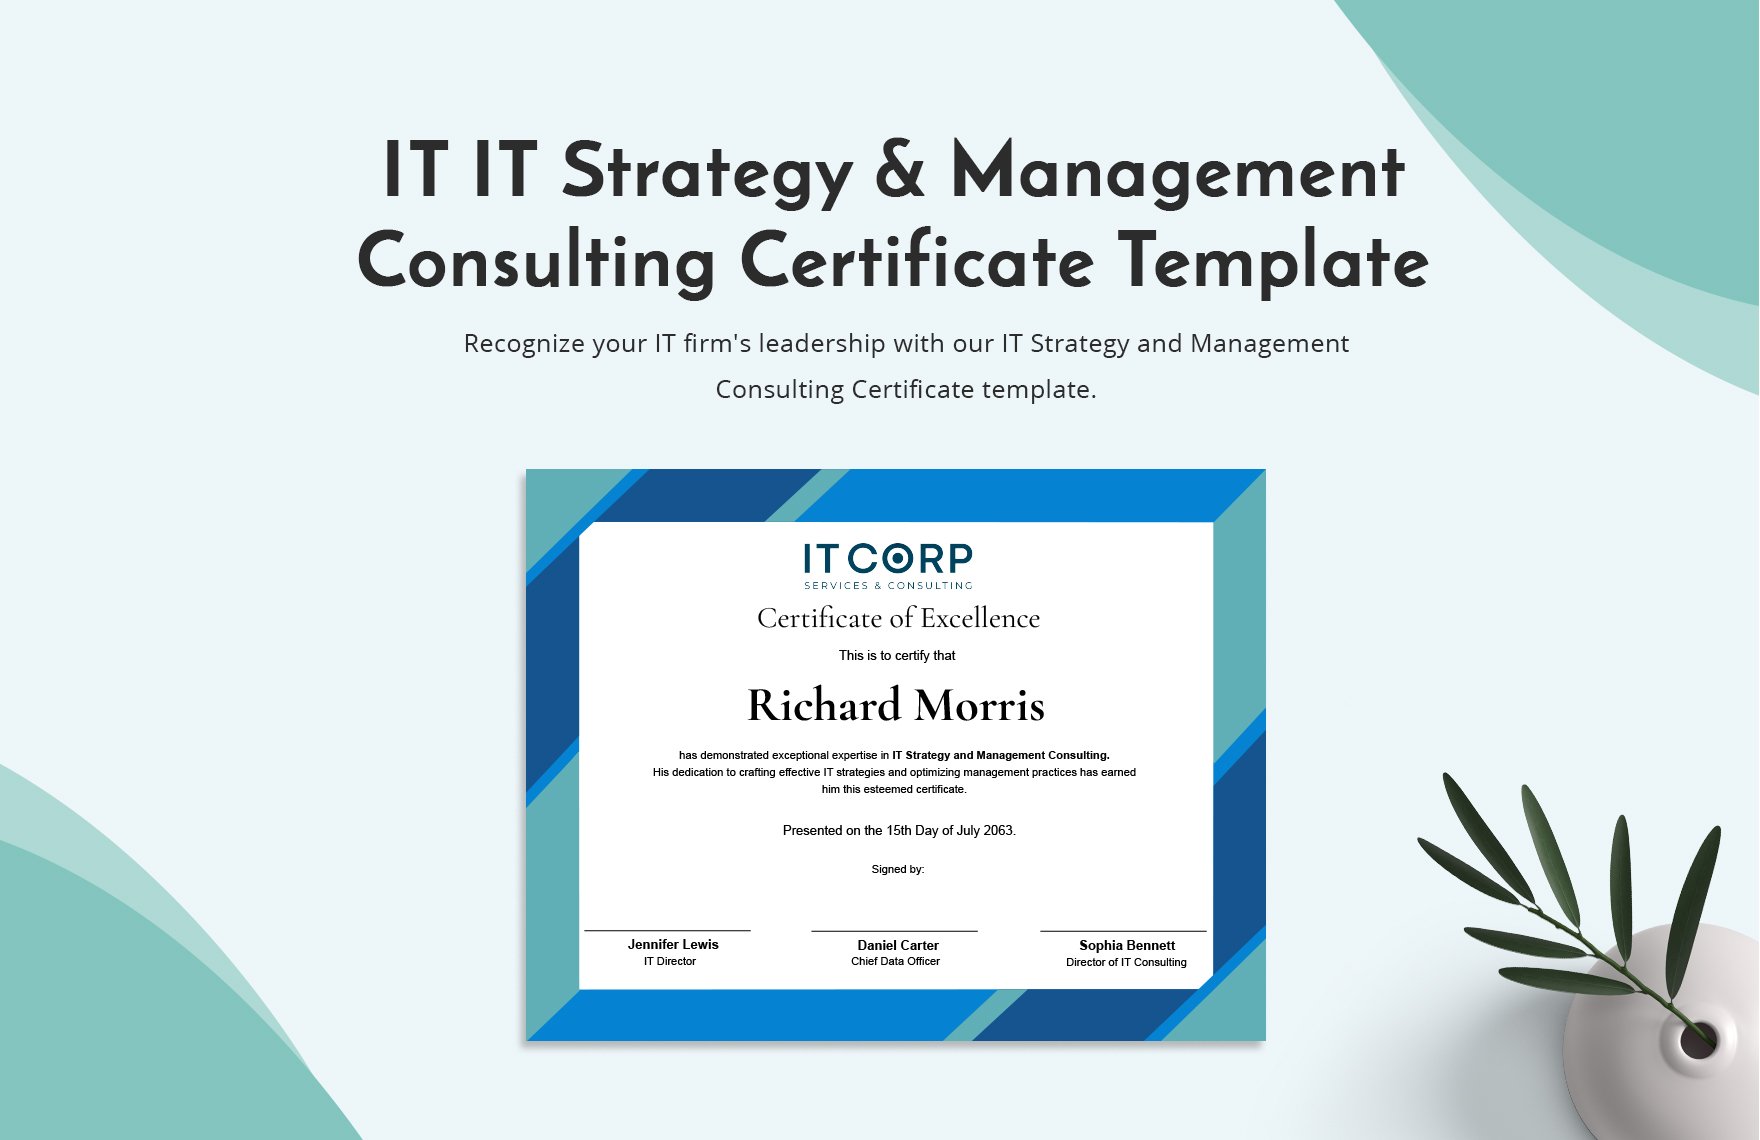 IT IT Strategy & Management Consulting Certificate Template in Word, Illustrator, PSD